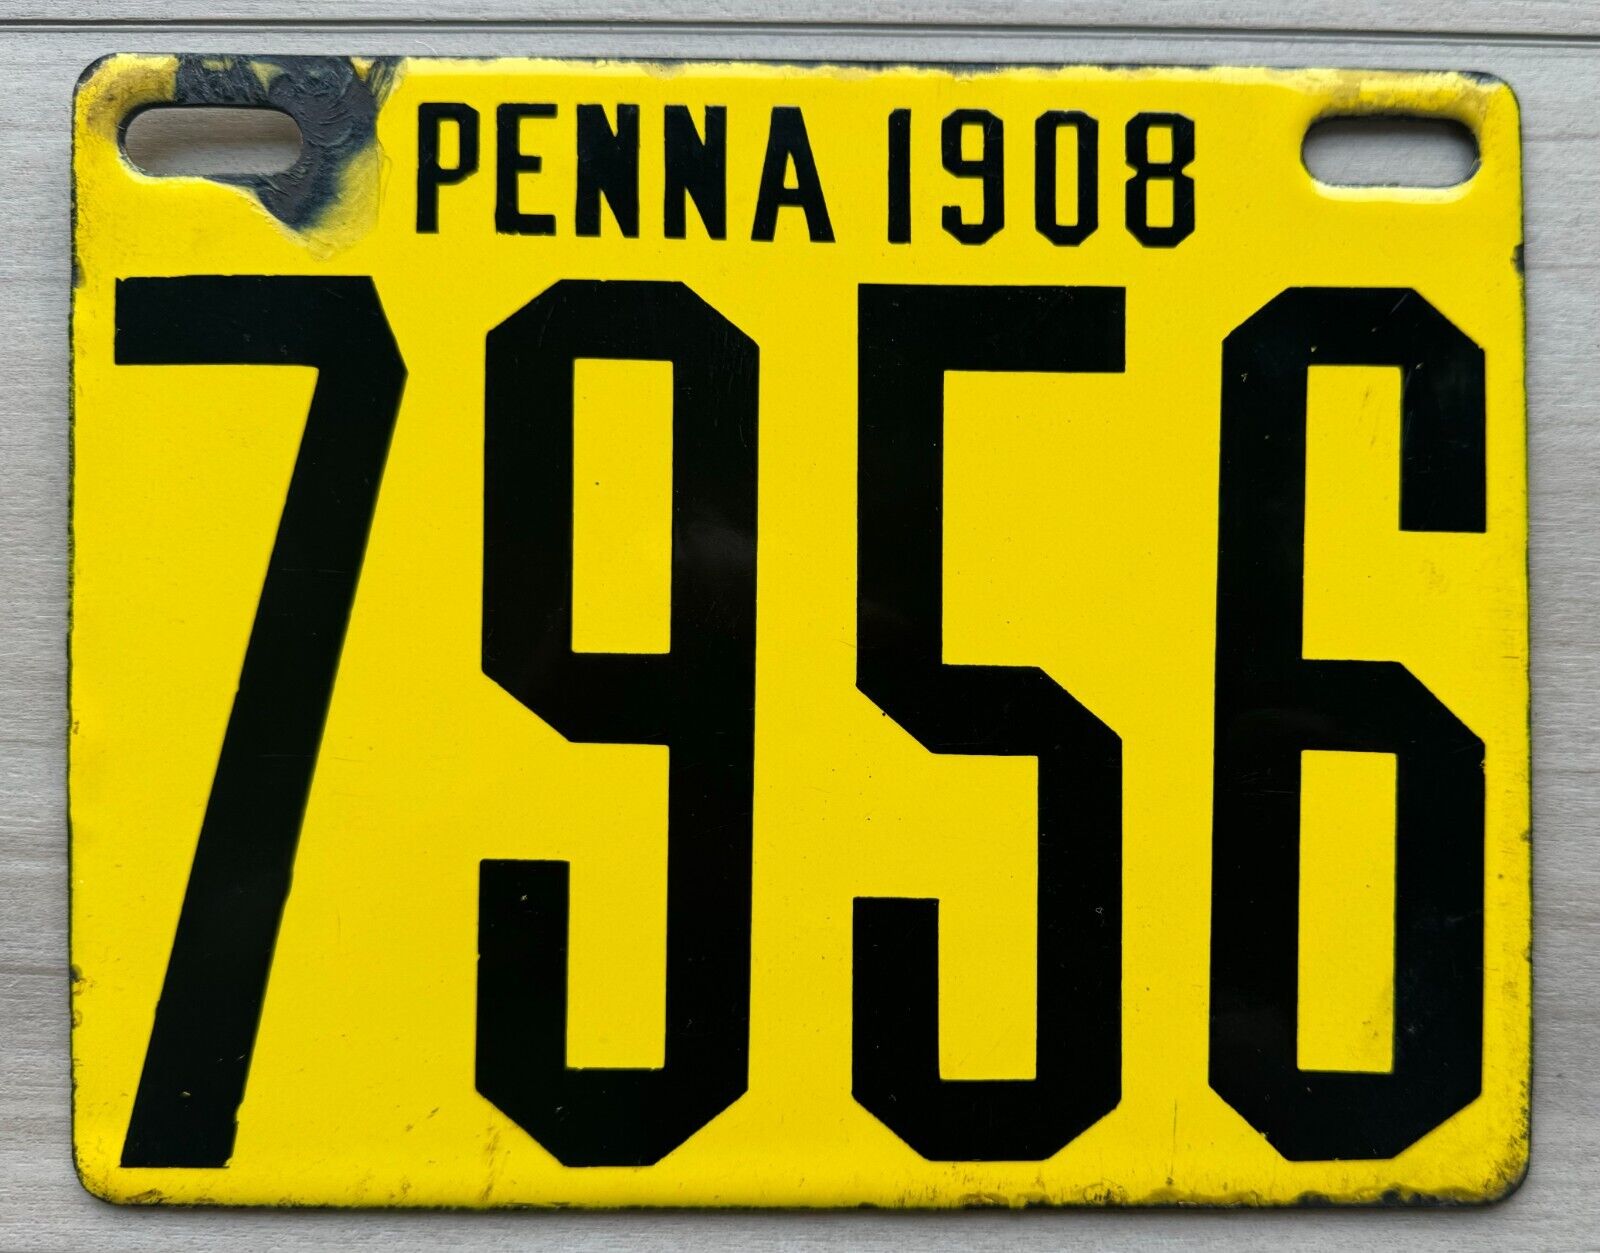 1908 Pennsylvania Porcelain License Plate -  Nice Condition - No Touch Up